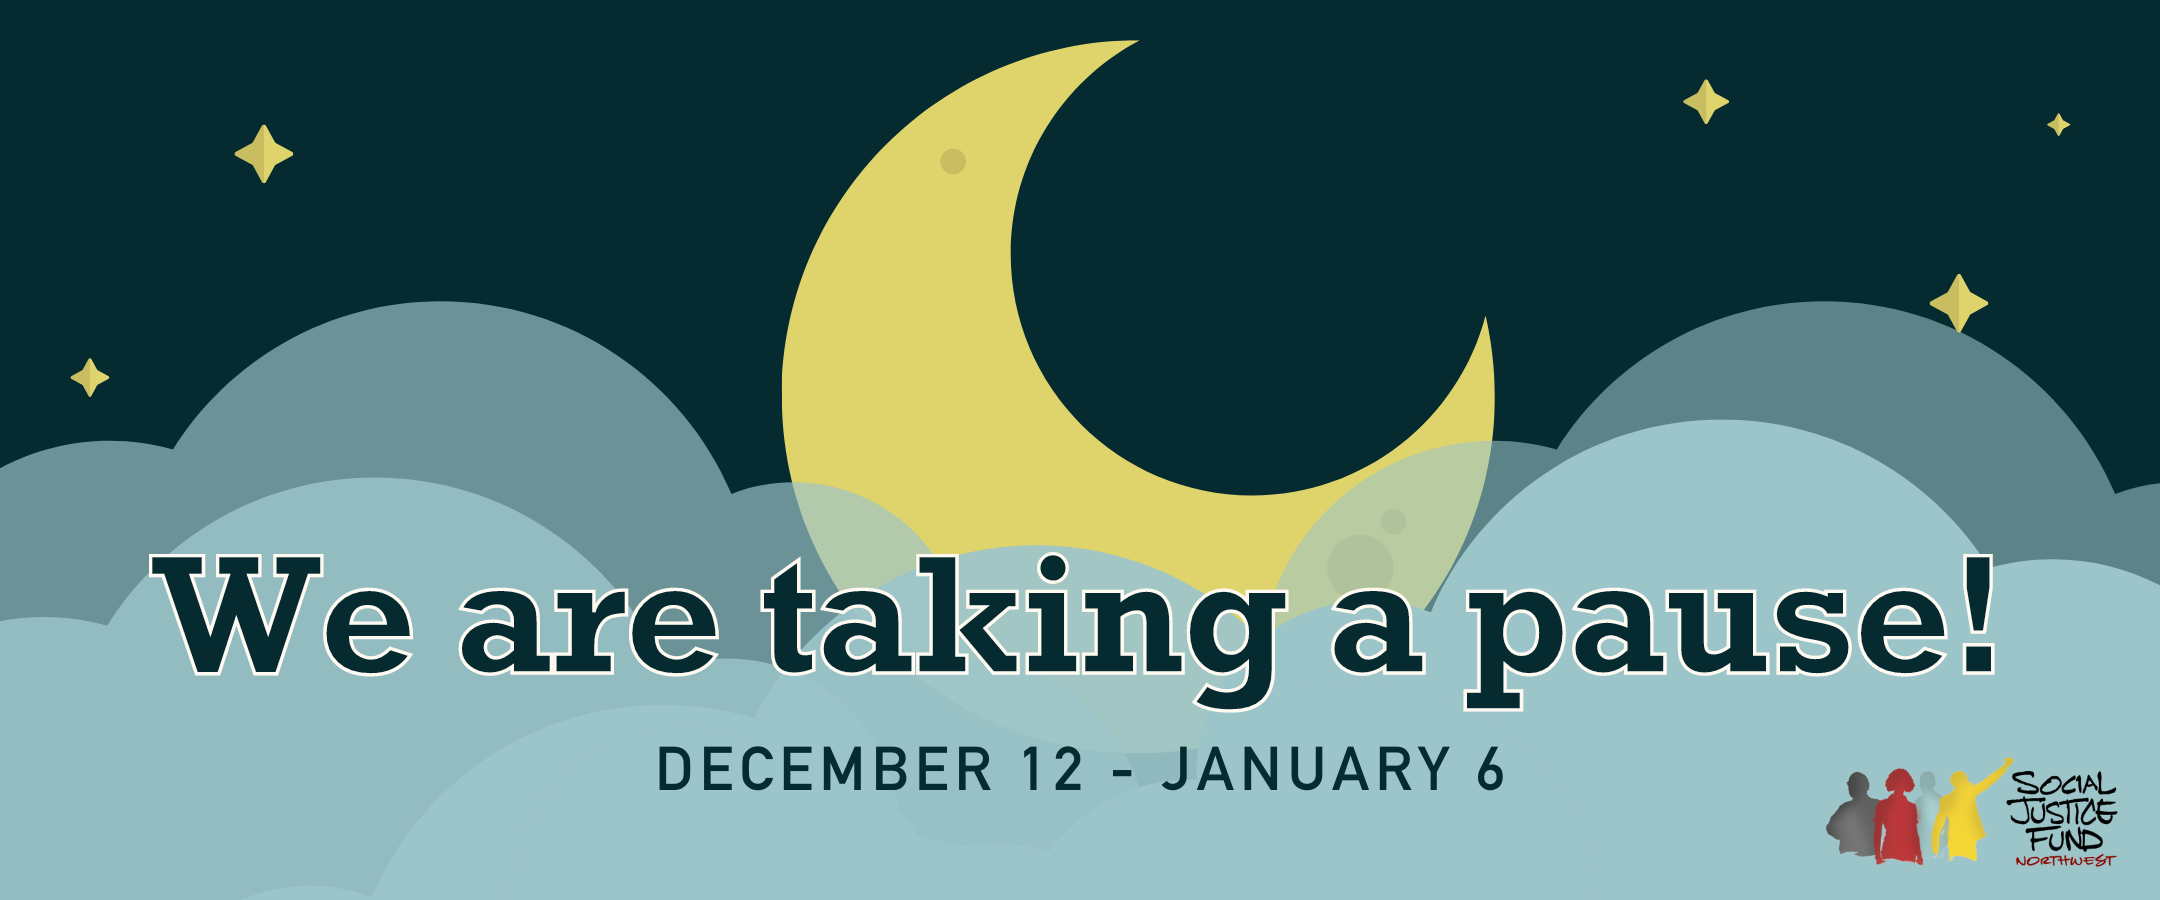 Rectangular banner with deep blue background light blue clouds and a yellow crescent moon and stars. Text reads We are taking a pause. December 12 through January 6.